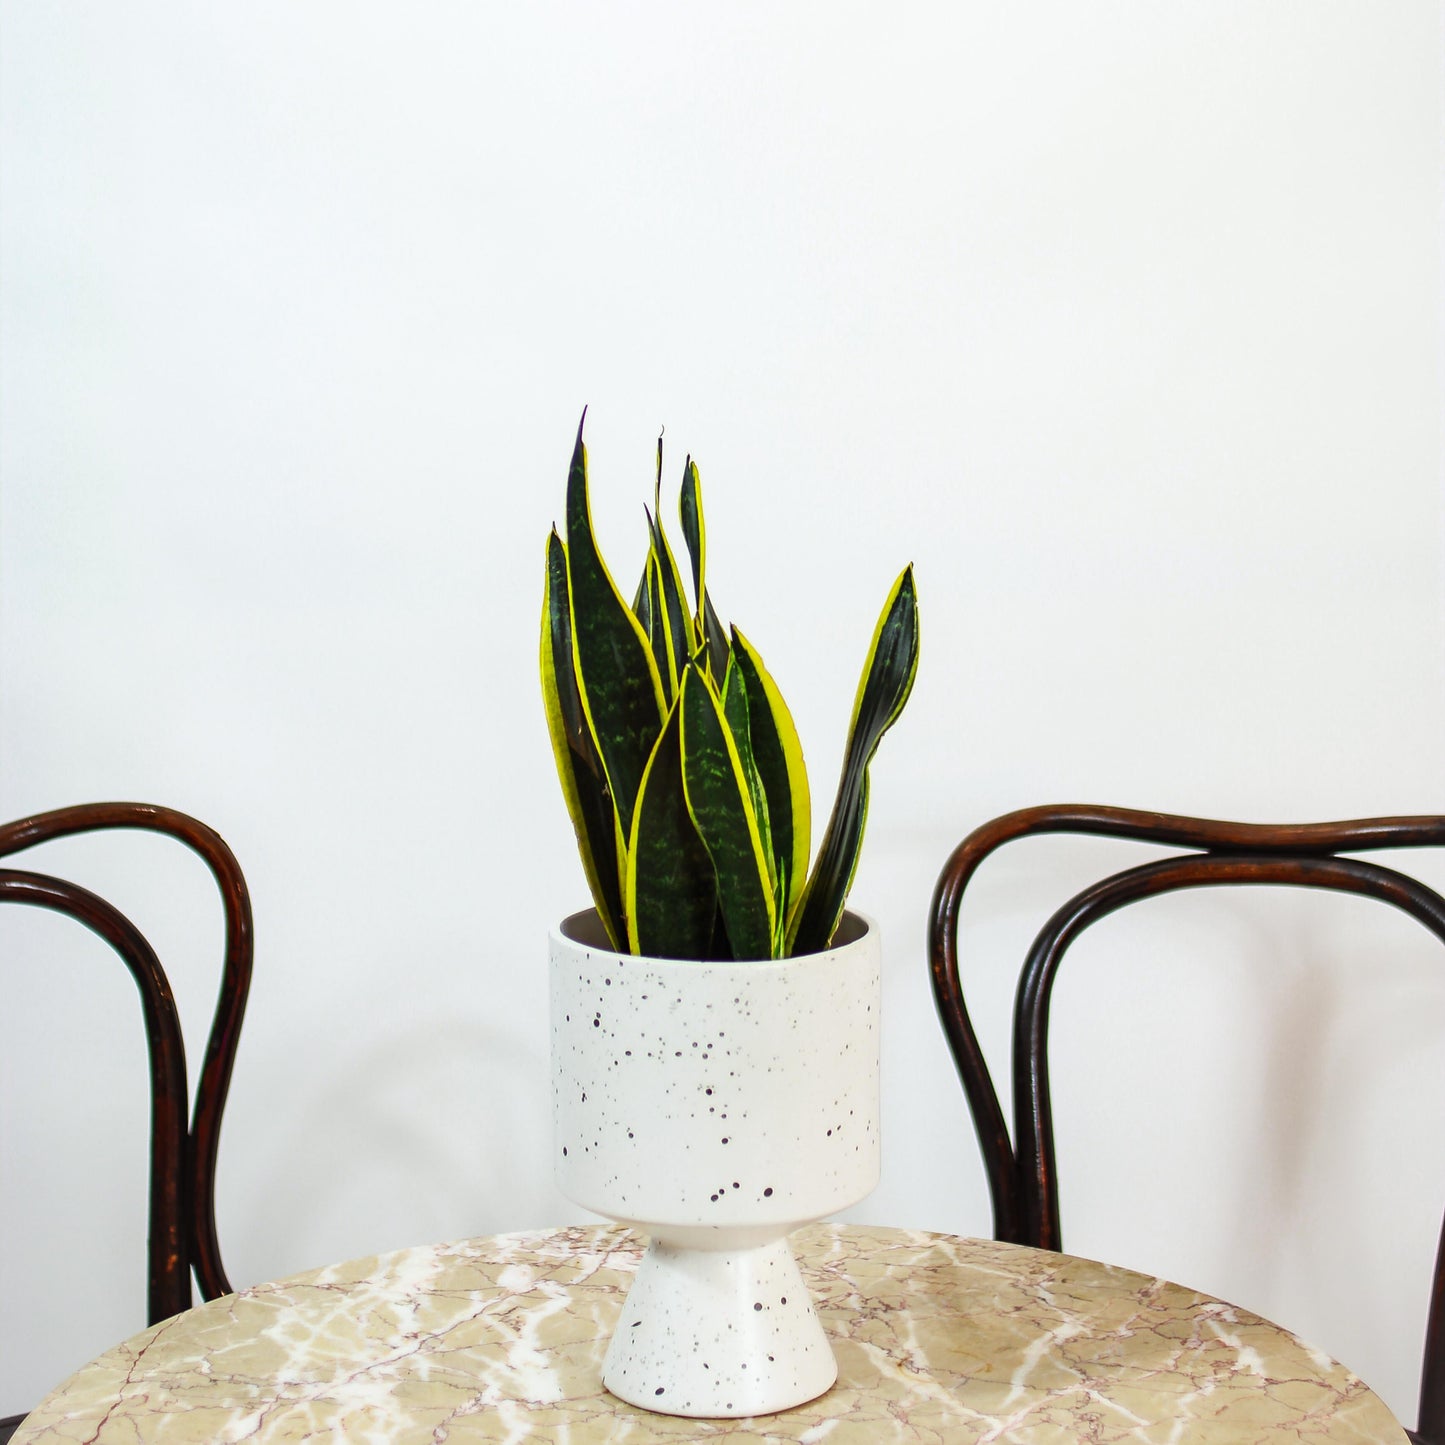 sansevieria trifasciata black gold in a white and black speckled  pot on a brown table in front of a white background